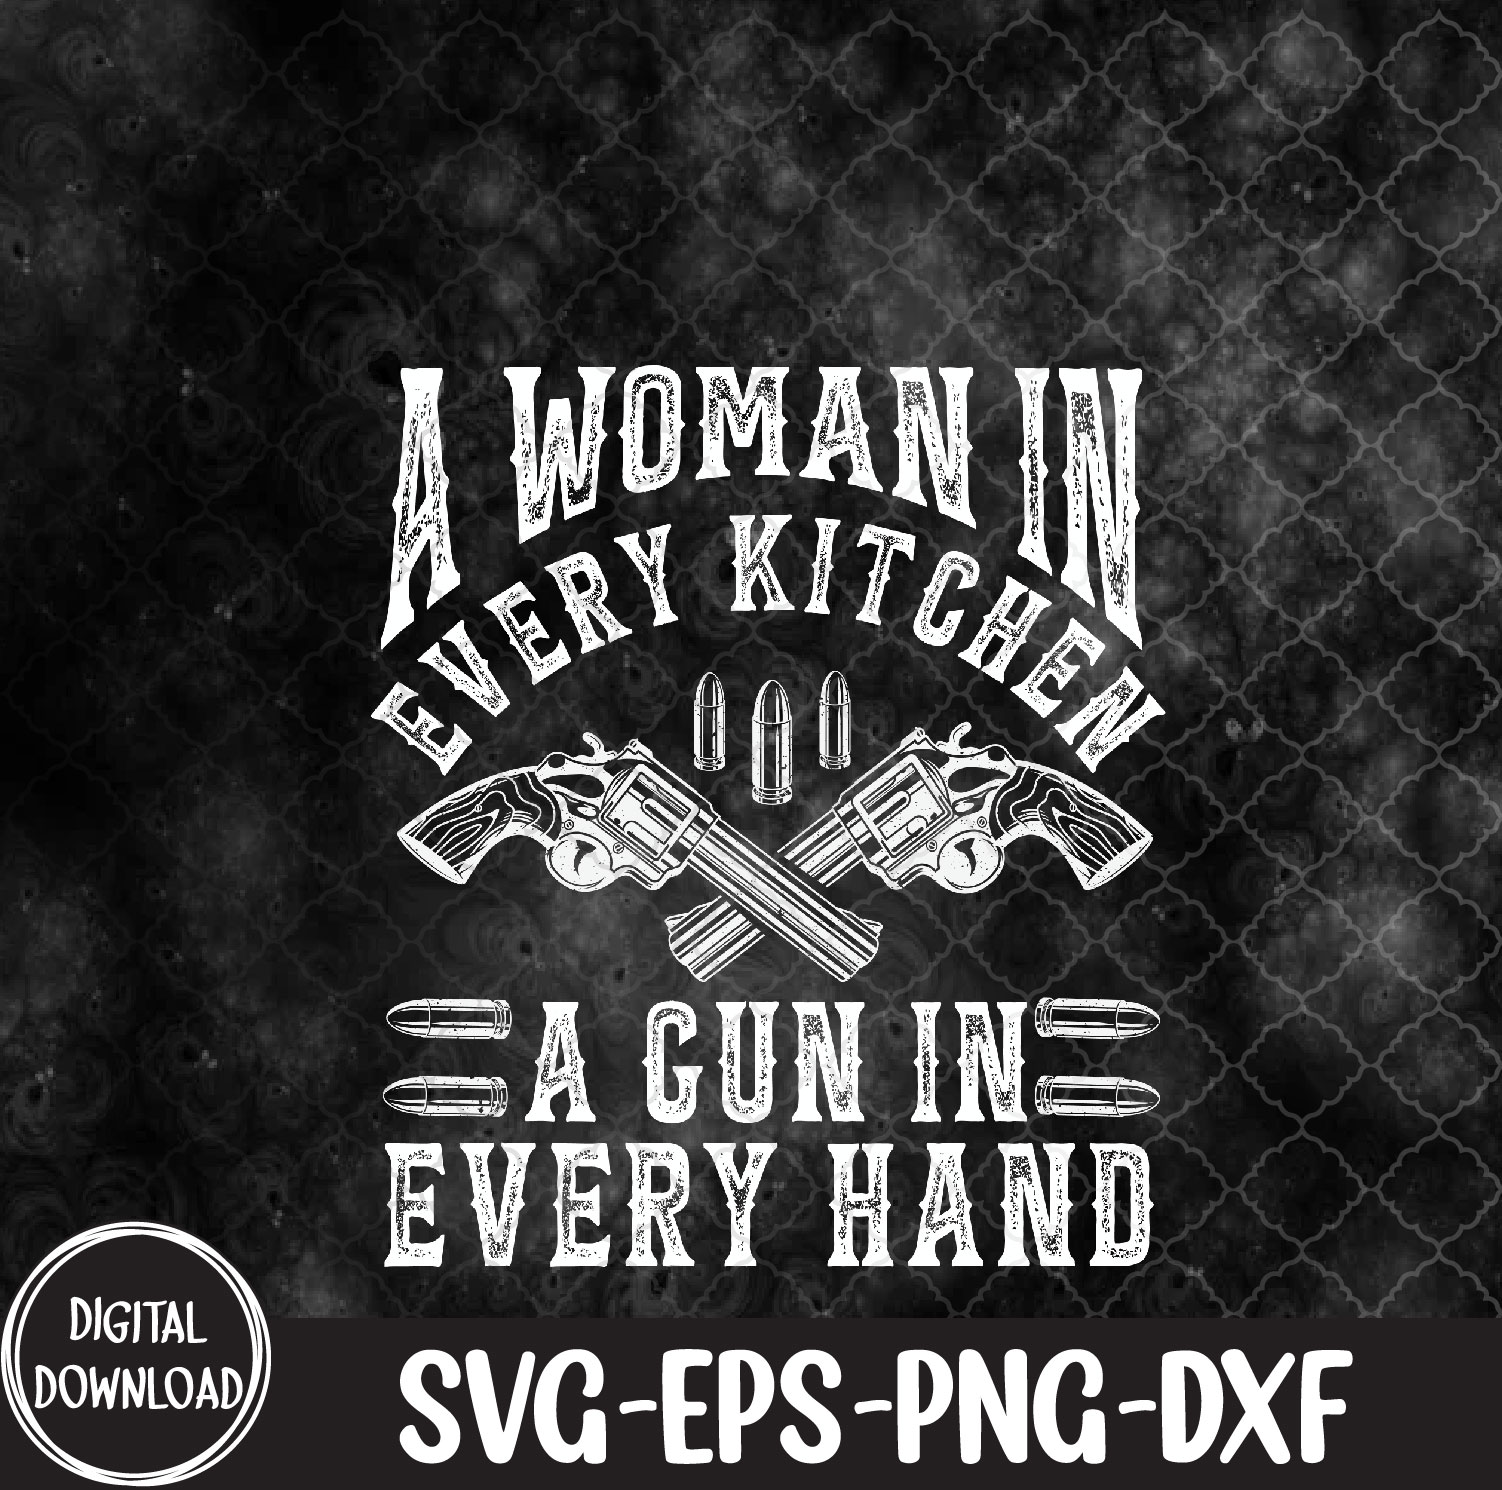 WTMNEW9file 09 104 A Woman In Every Kitchen A Gun In Every Hand Svg, Eps, Png, Dxf